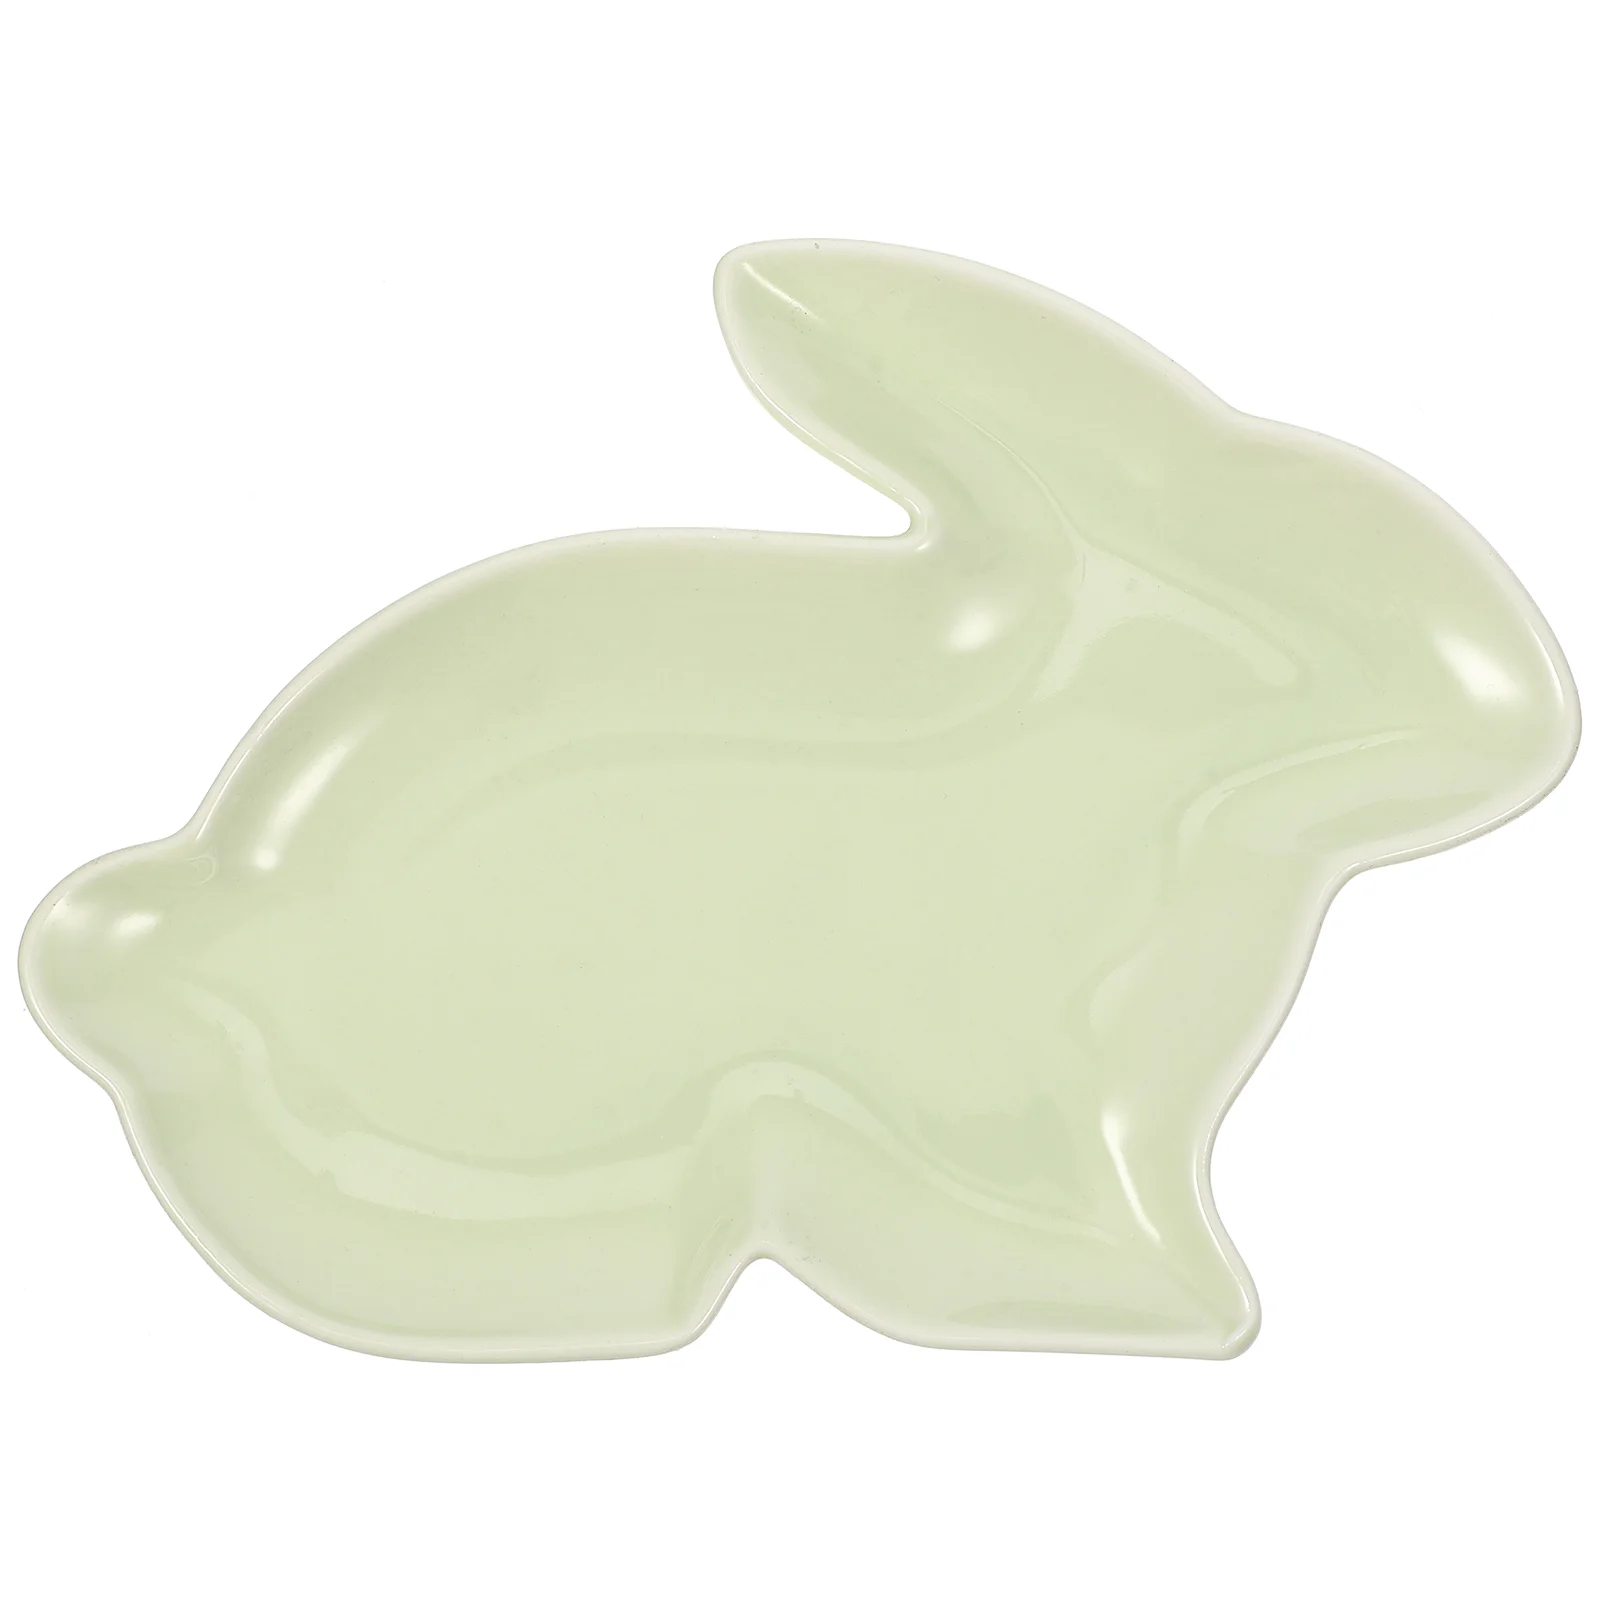 

Plate Easter Tray Plates Rabbit Bunny Ceramic Serving Candy Snack Holder Appetizer Cake Dishes Party Dessert Storage Bowl Fruit